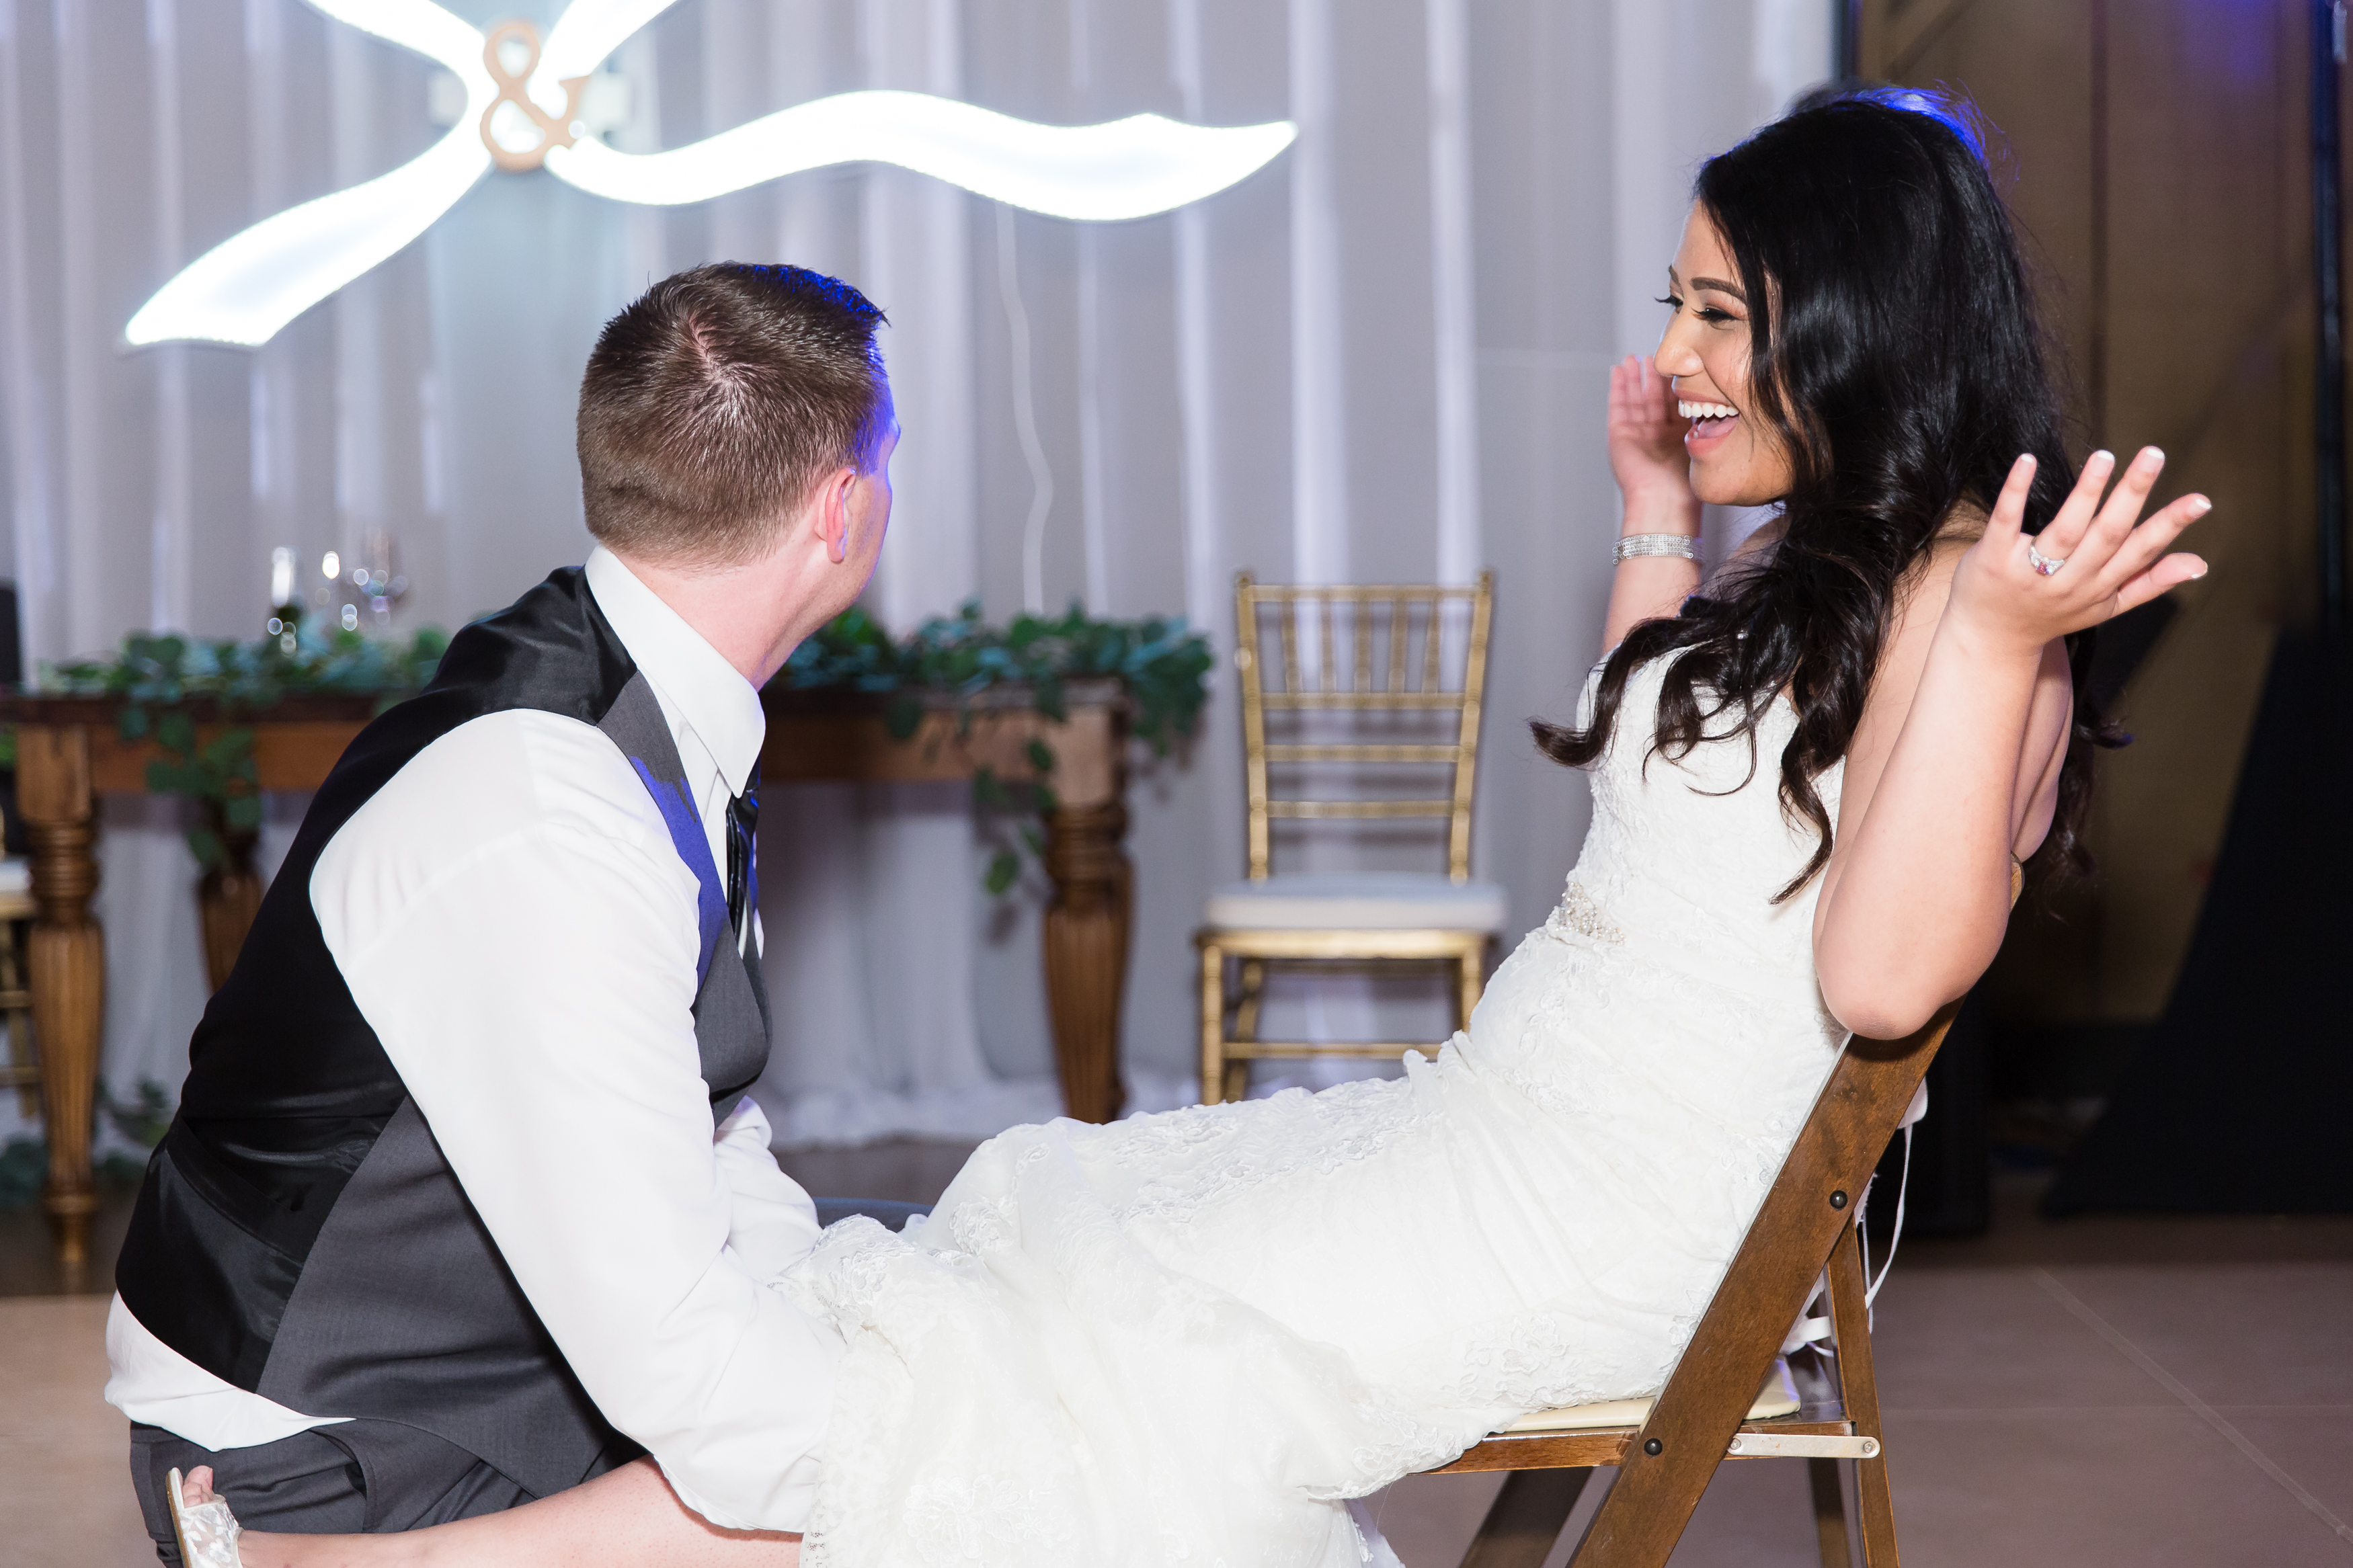 Groom removes garter while bride laughs